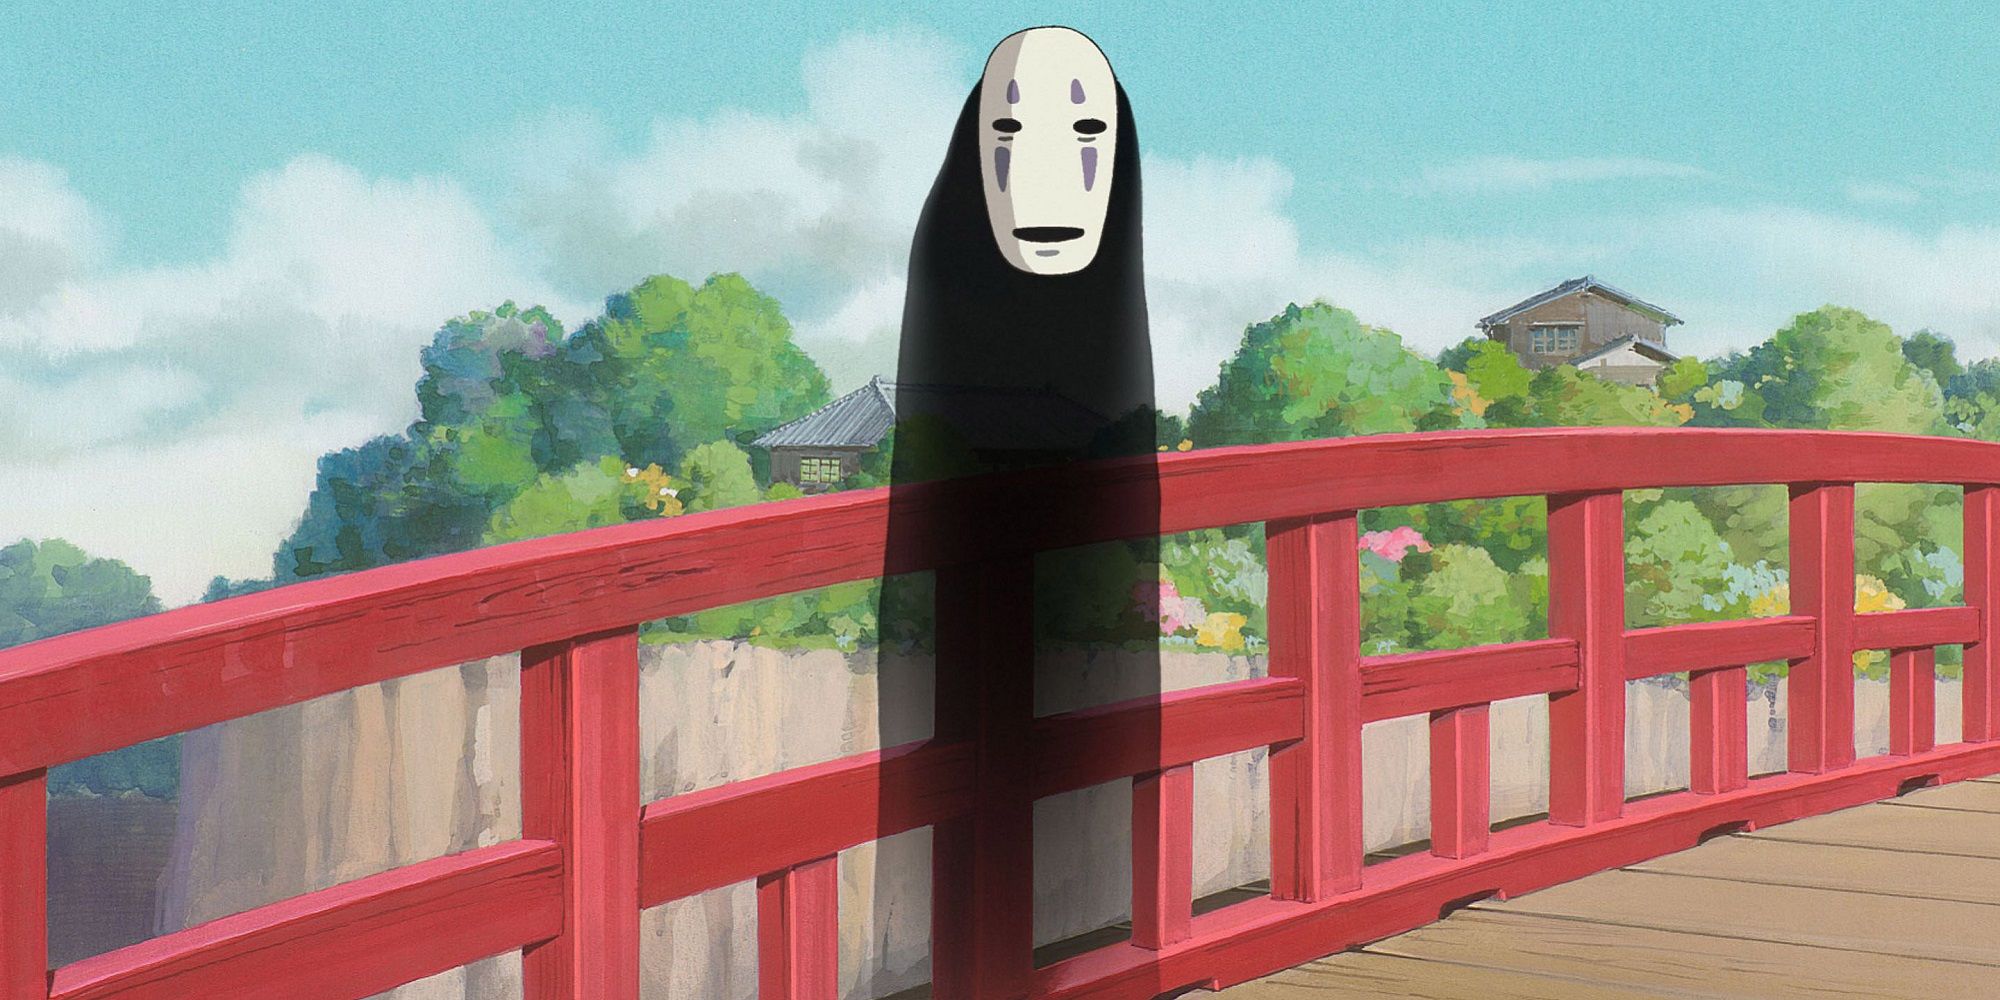 No Face stands on a red bridge during the day in Spirited Away.